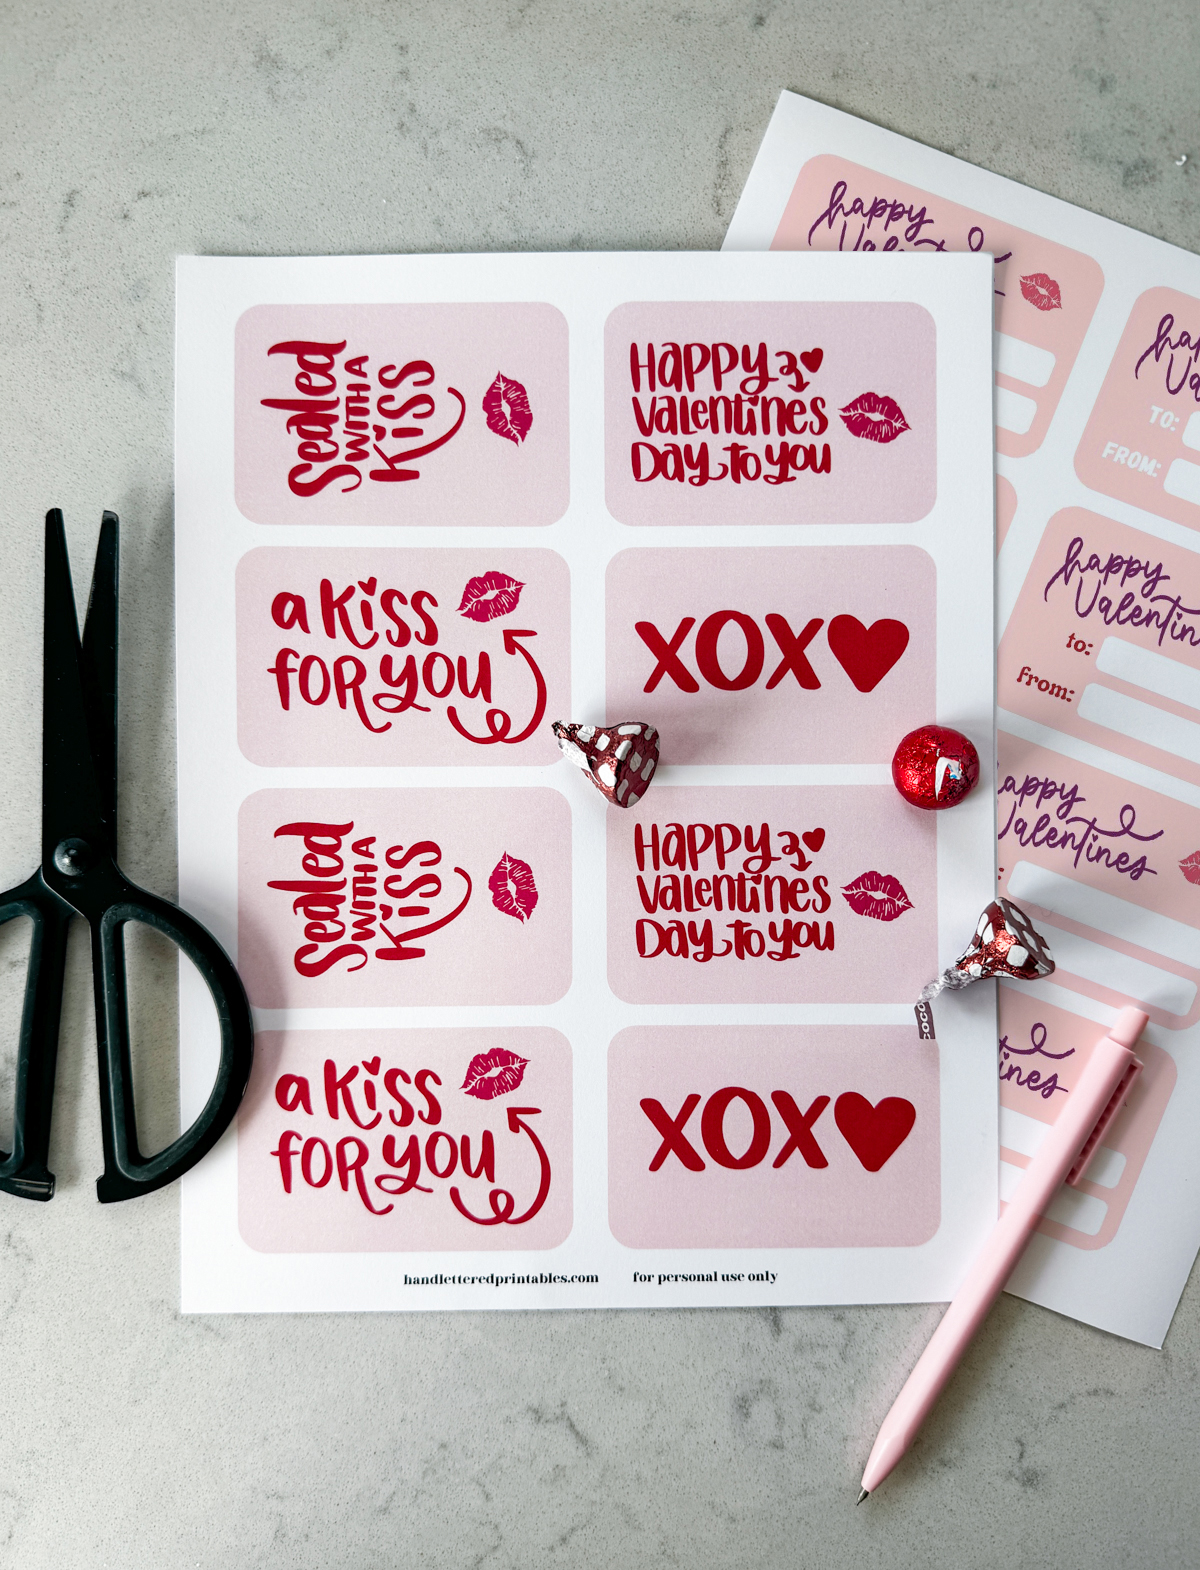 free printable valentines cards shown printed as full sheets, ready to be cut out. Front has 4 versions with pink backgrounds and red lettering that read 'sealed with a kiss' 'happy valentines day to you' 'a kiss for you' and 'xoxo' perfect for pairing with chocolate kisses